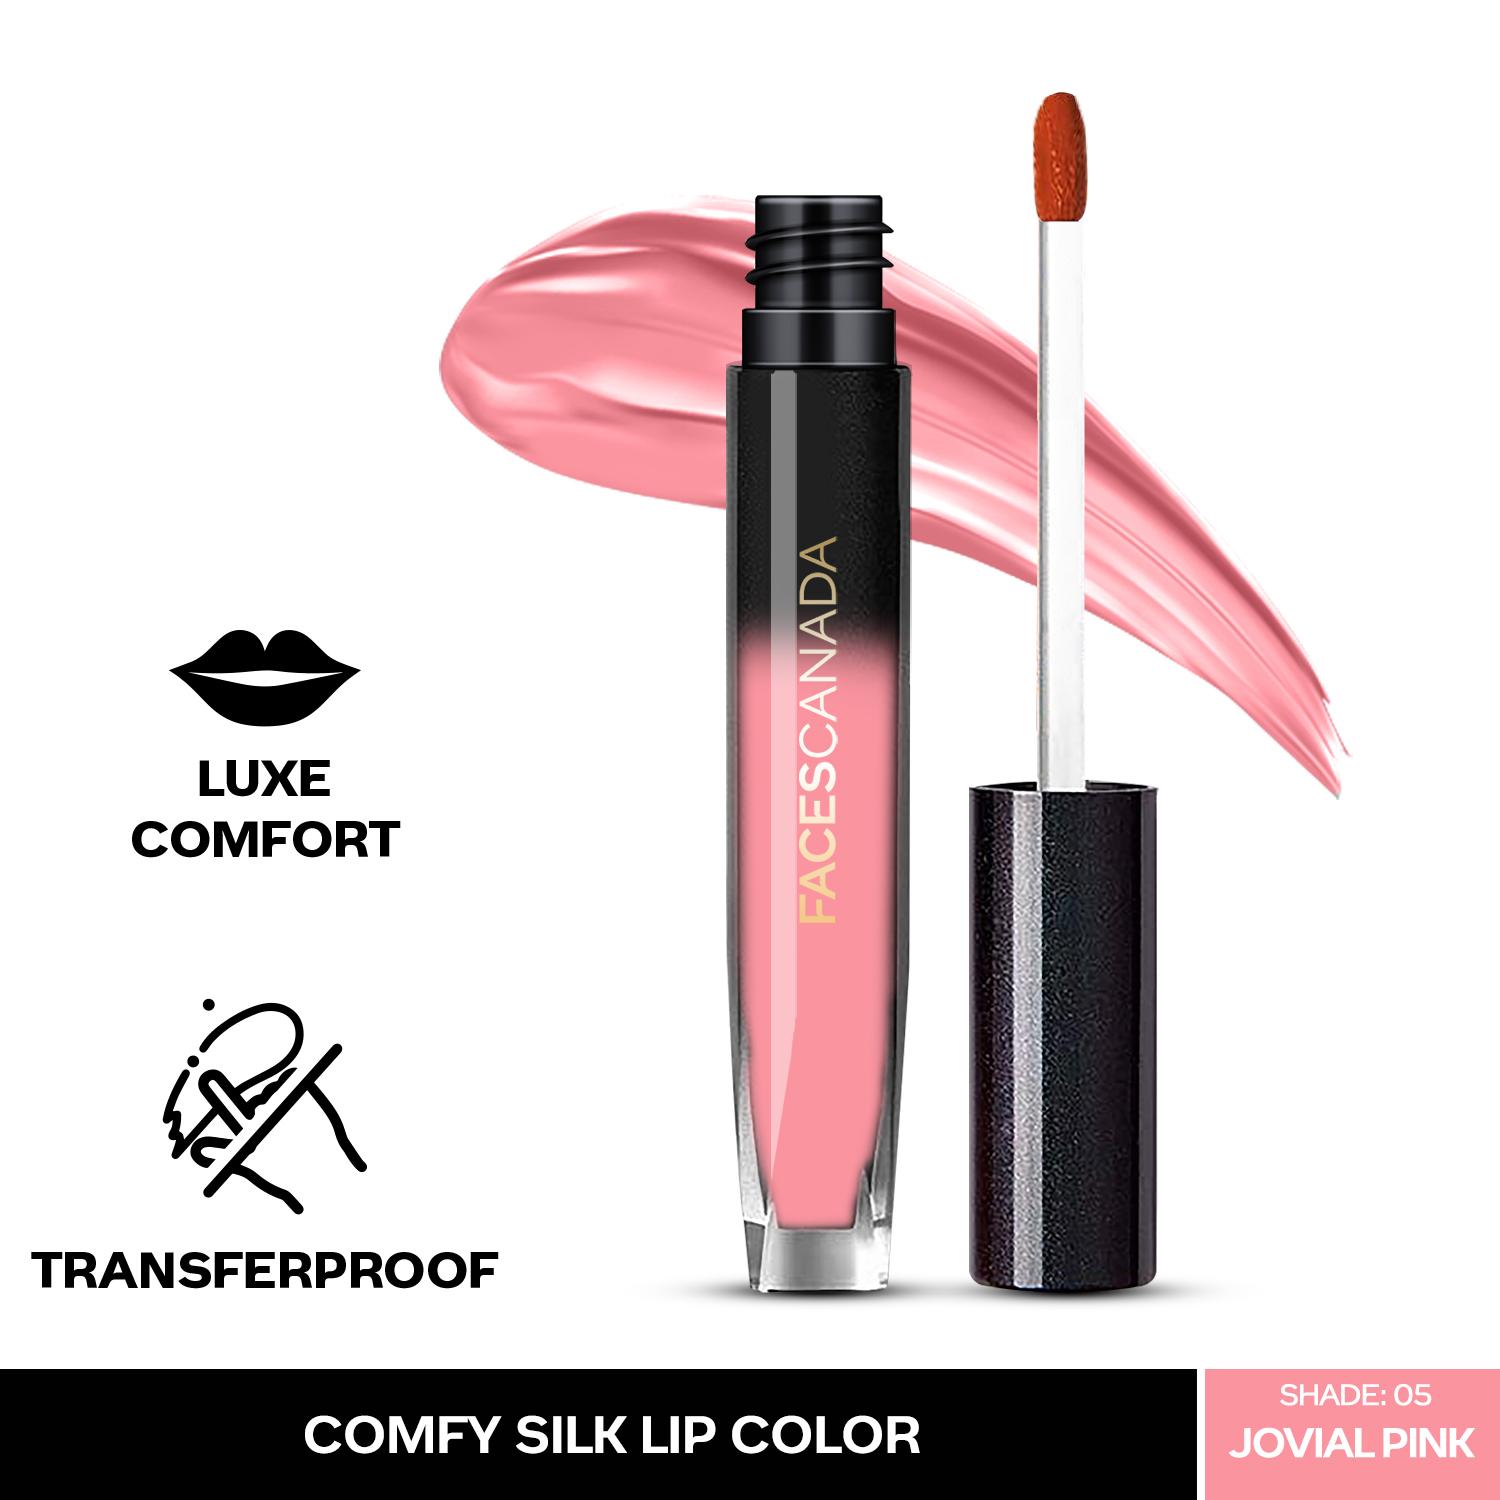 Faces Canada | Faces Canada Comfy Silk Lip Color I Mulberry Oil, Luxe Comfort, No Dryness I Jovial Pink 05 (3 ml)